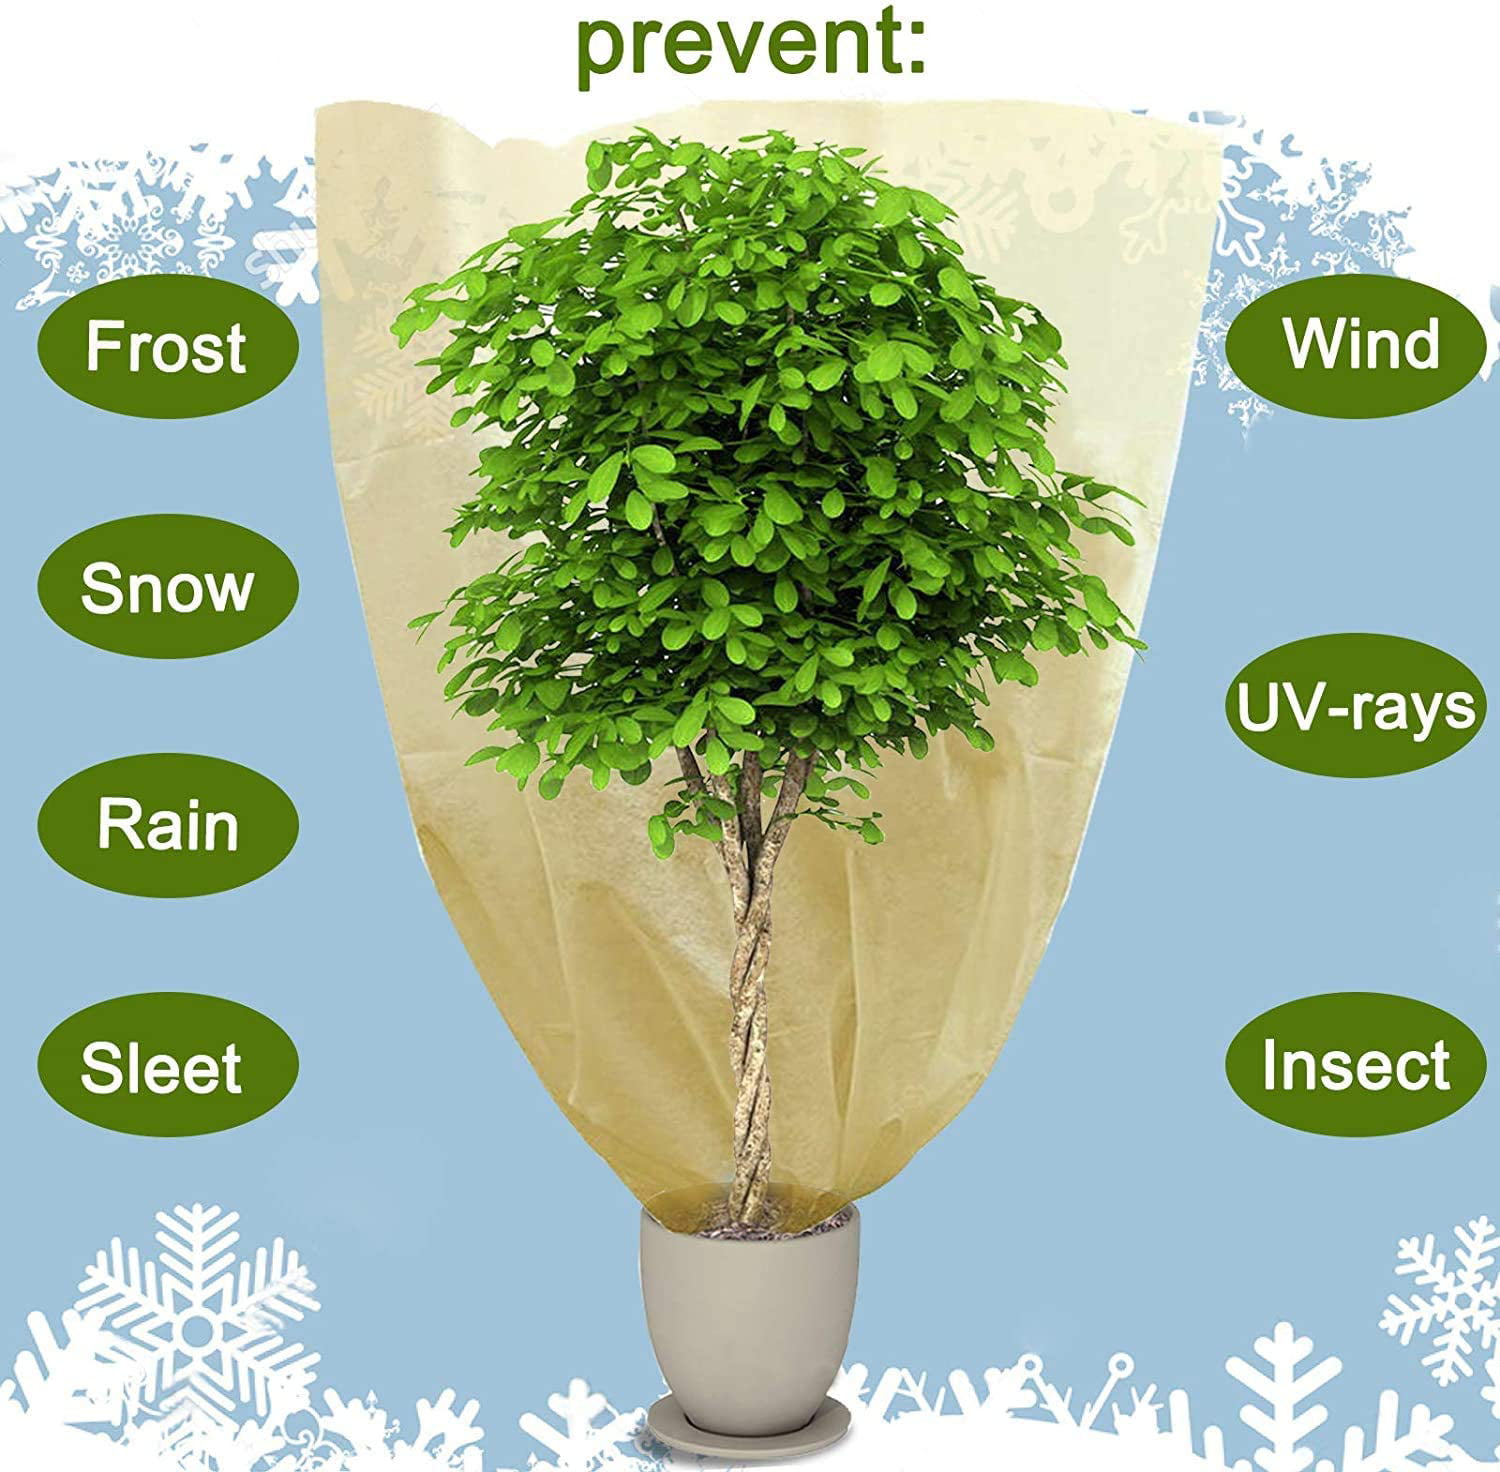 Plant Cover 2 Packs,Plant Covers Freeze Protection,79 x 94 Reusable Plant Cover Protection Bags with Drawstring for Winter Frost Protection,Warm Thicker Outdoor Blanket for Shrub and Trees Green